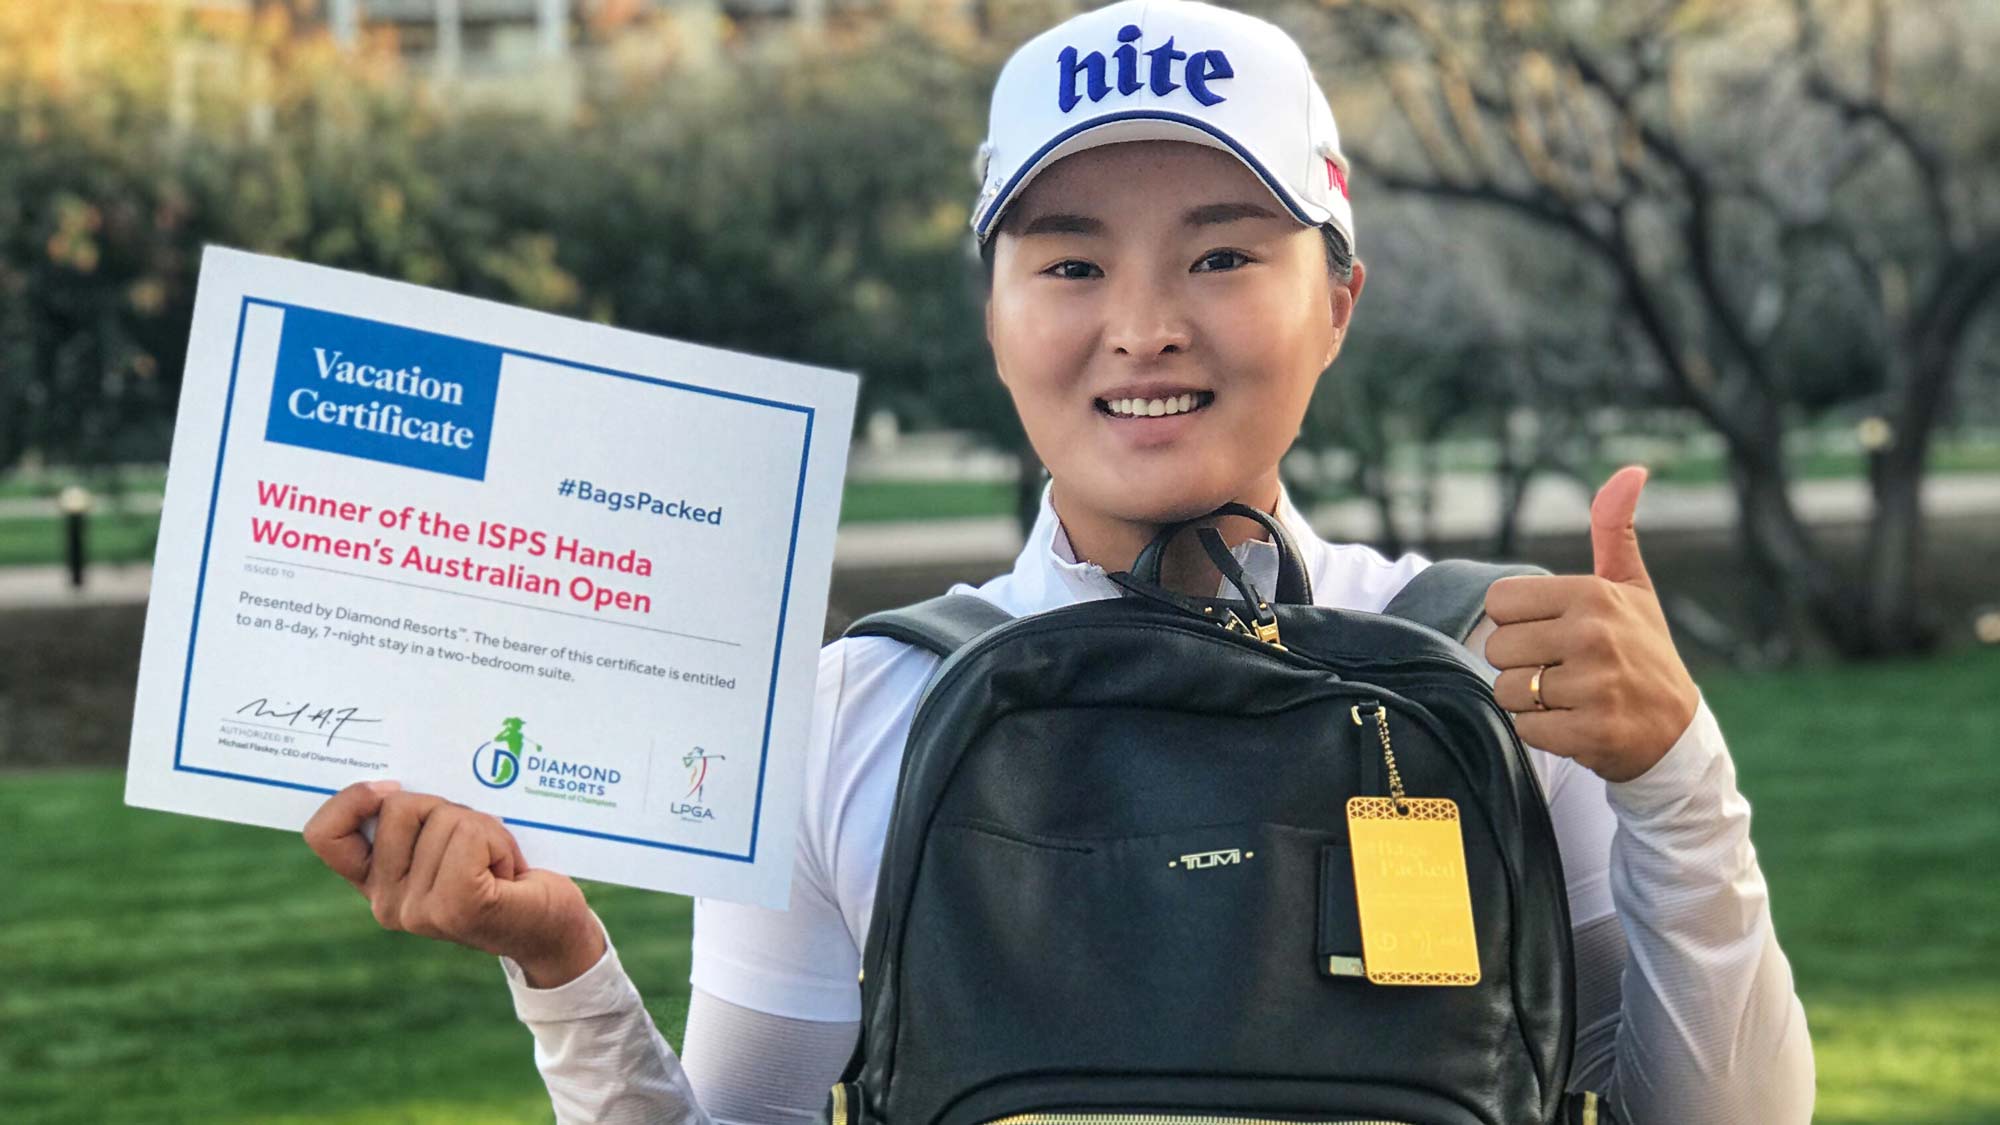 Jin Young Ko has her #BagsPacked for the 2019 Diamond Resorts Tournament of Champions after her win at the ISPS Handa Women's Australian Open